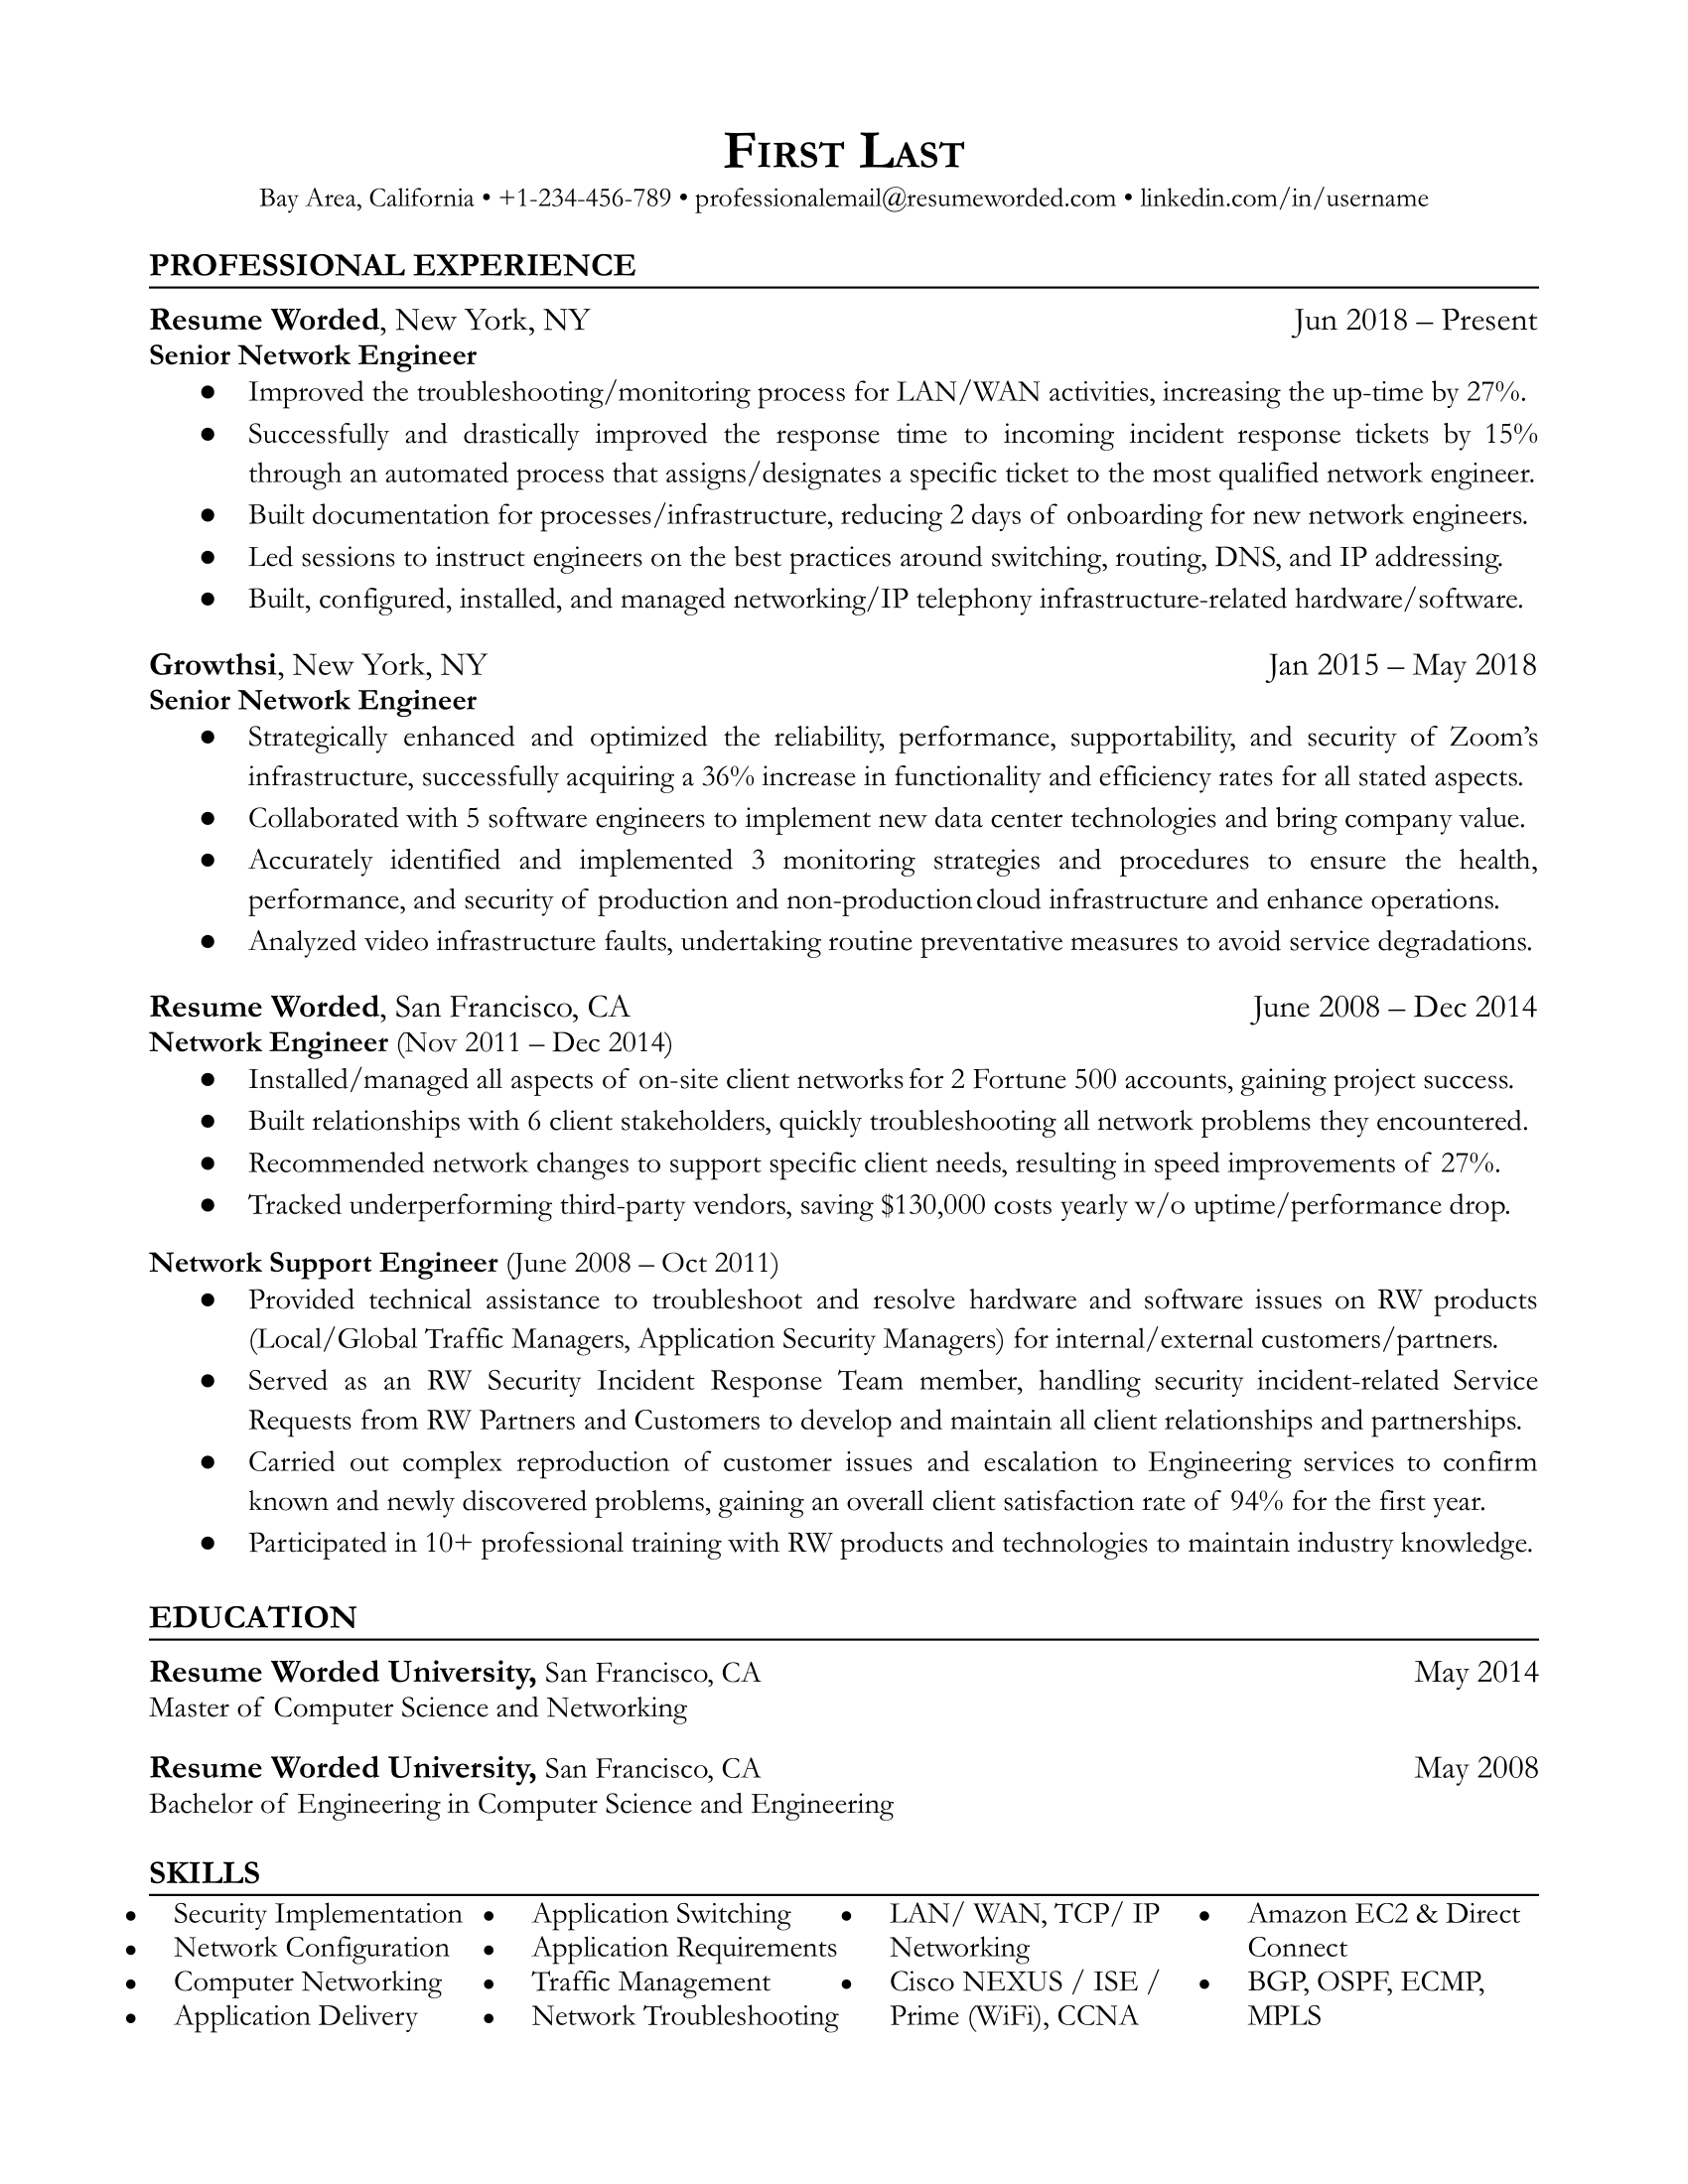 Senior Network Engineer's CV showing project management and tech advancement experiences.